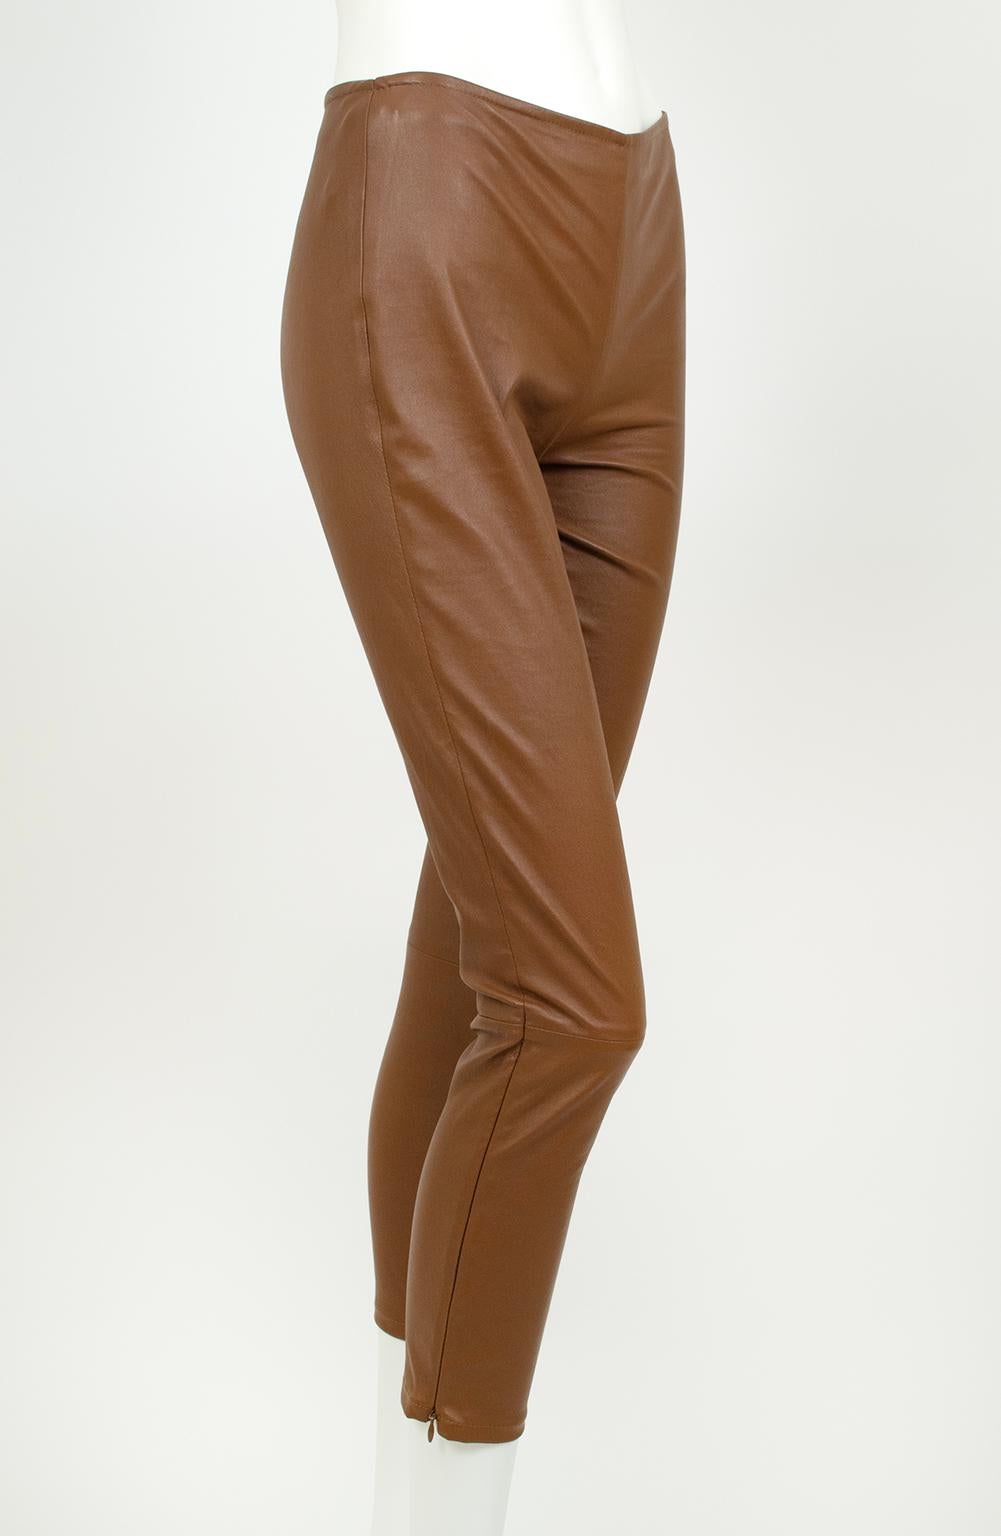 The gold standard in “quiet luxury,” The Row has been churning out pared-back, minimalist fashion since 2001. A cult favorite, their leather leggings have become a wardrobe staple among the Haute Monde and for good reason: they pair effortlessly